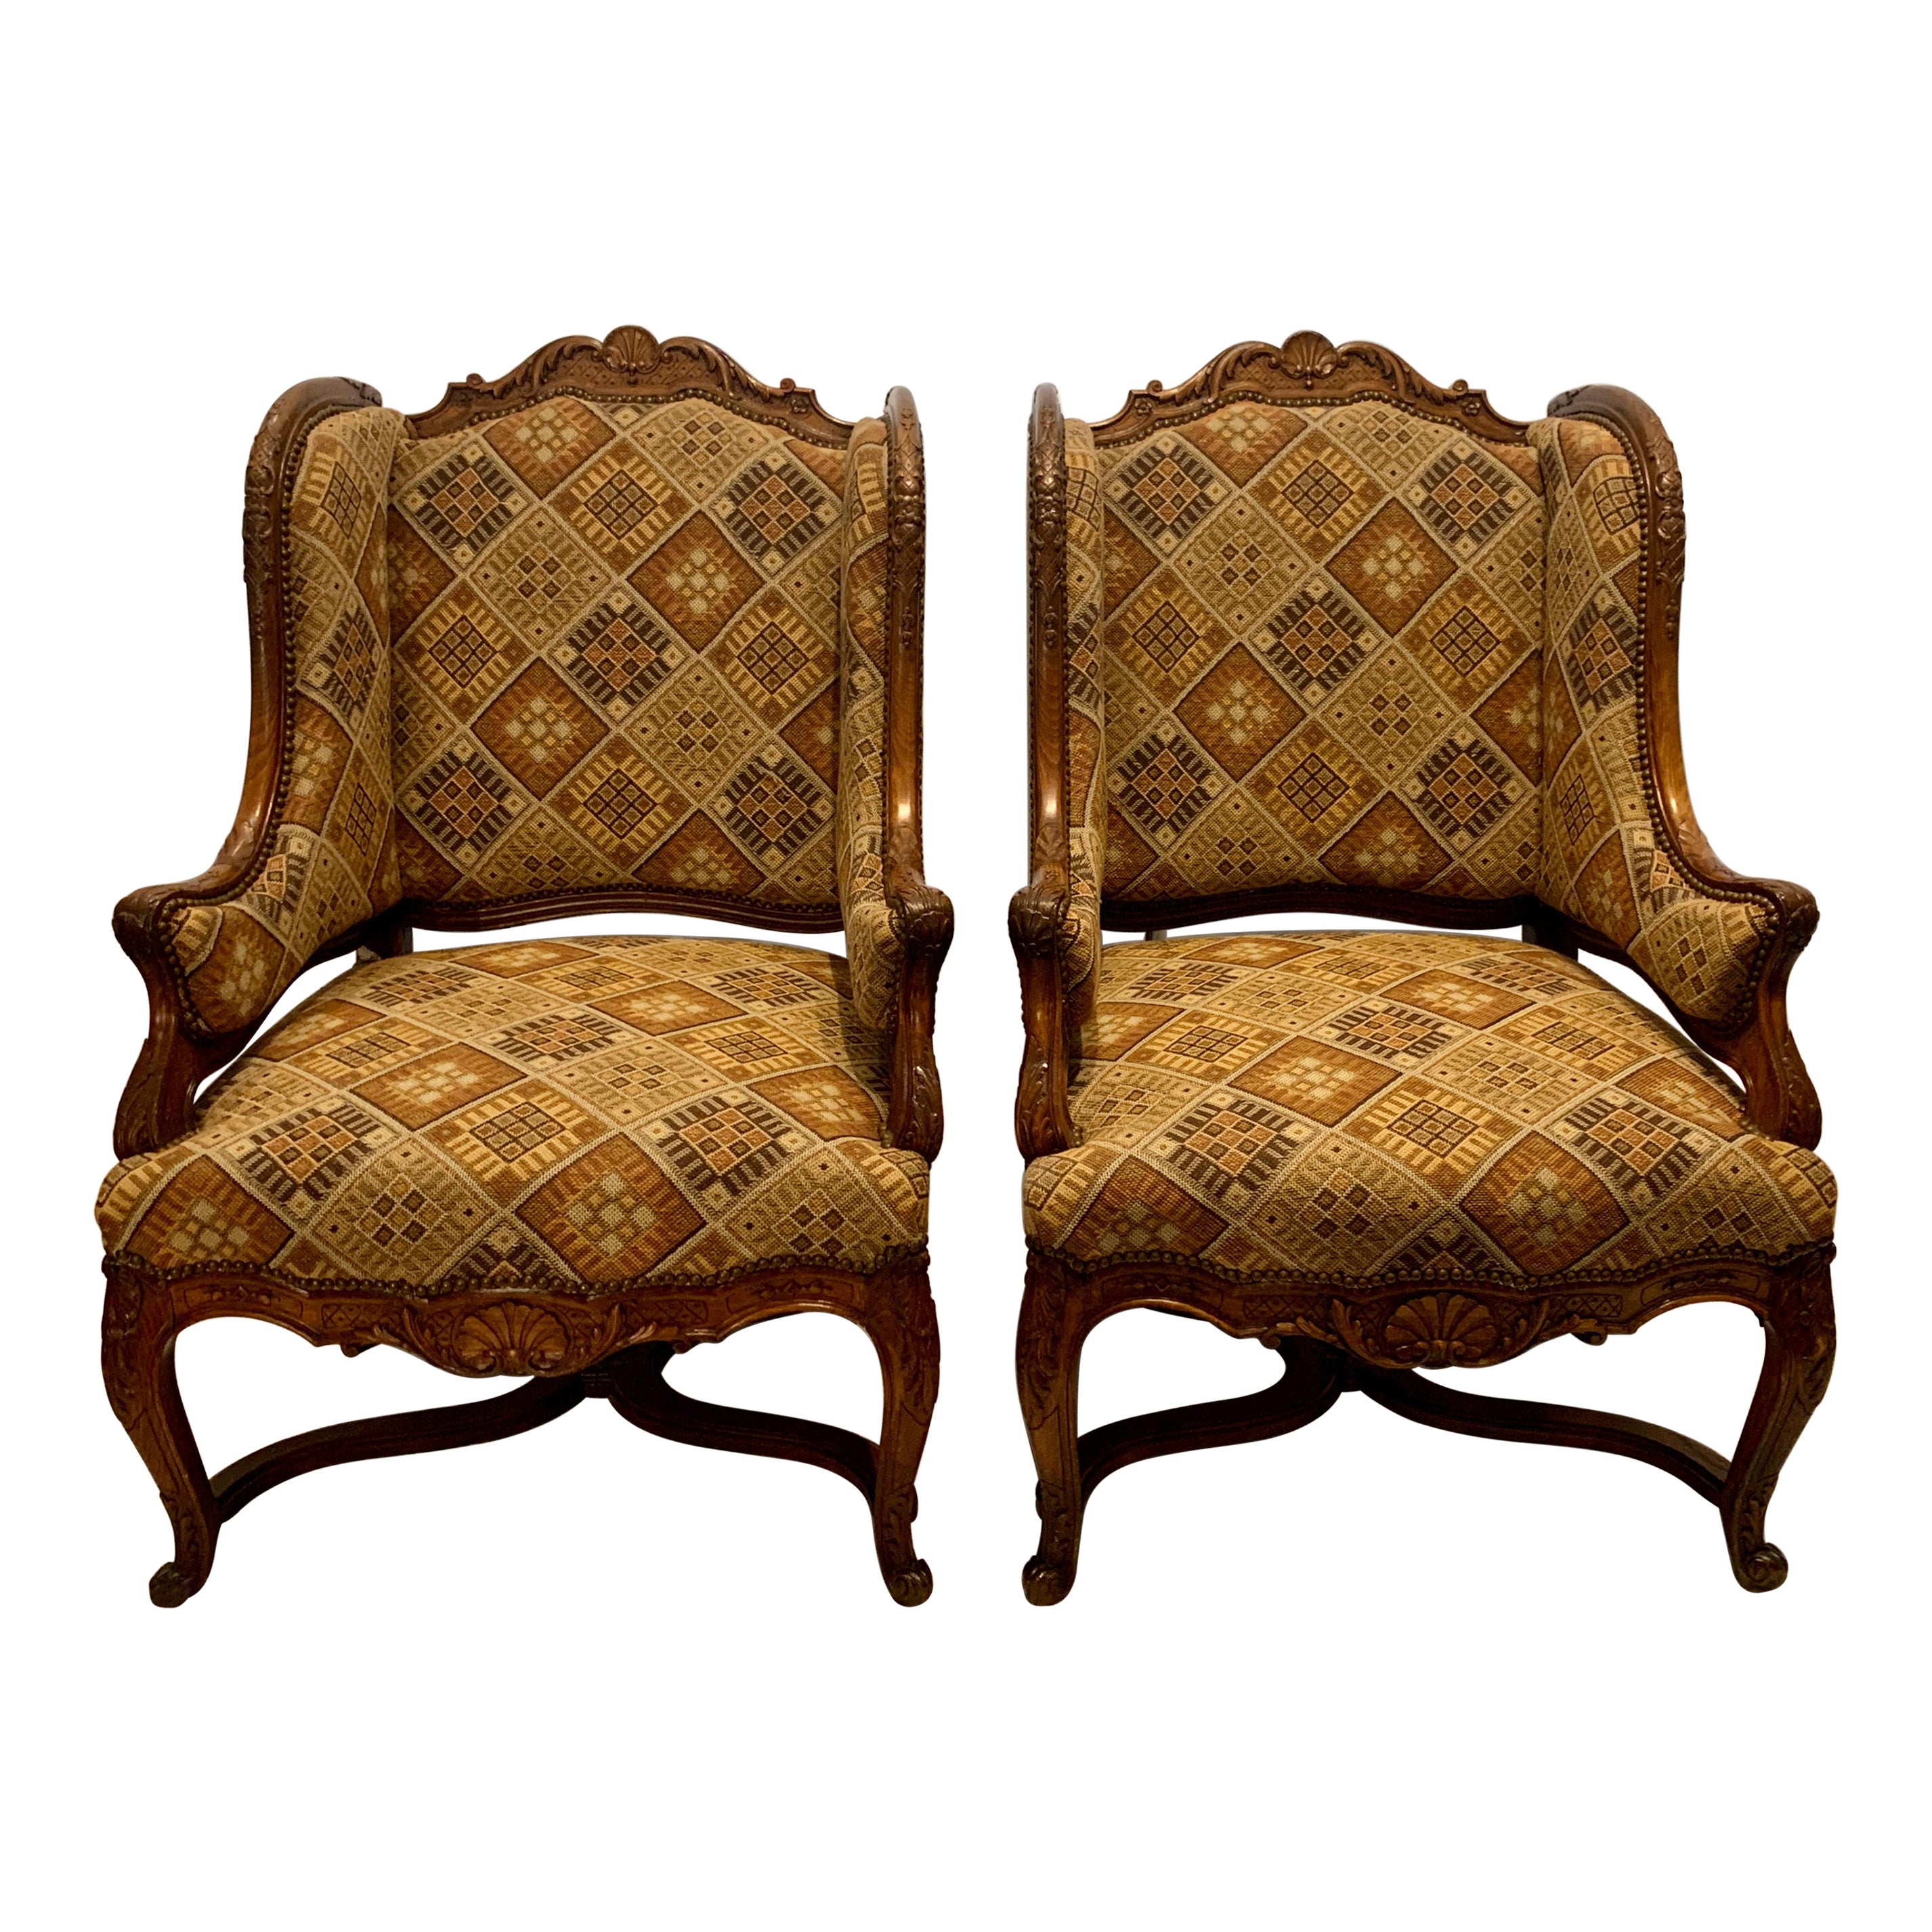 Pair Antique French Carved Walnut Upholstered Bergeres / Armchairs, circa 1880 For Sale